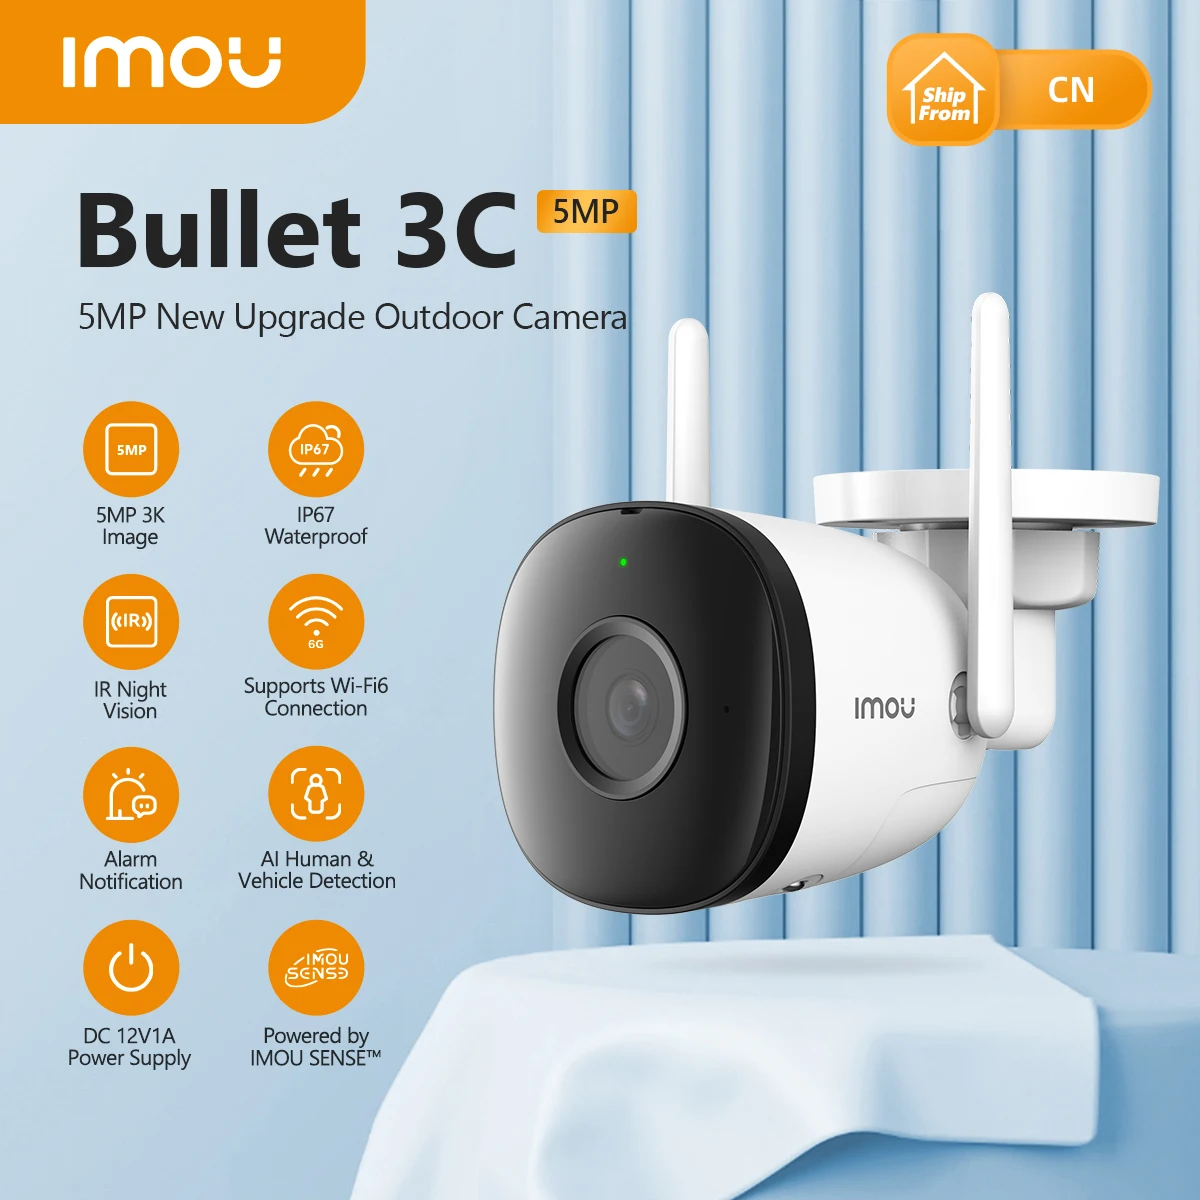 

IMOU Bullet 3C 5MP&3MP IP Camera PoE WiFi 6 Connection Outdoor AI Human Vehicle Detection Surveillance Security Protection IP67